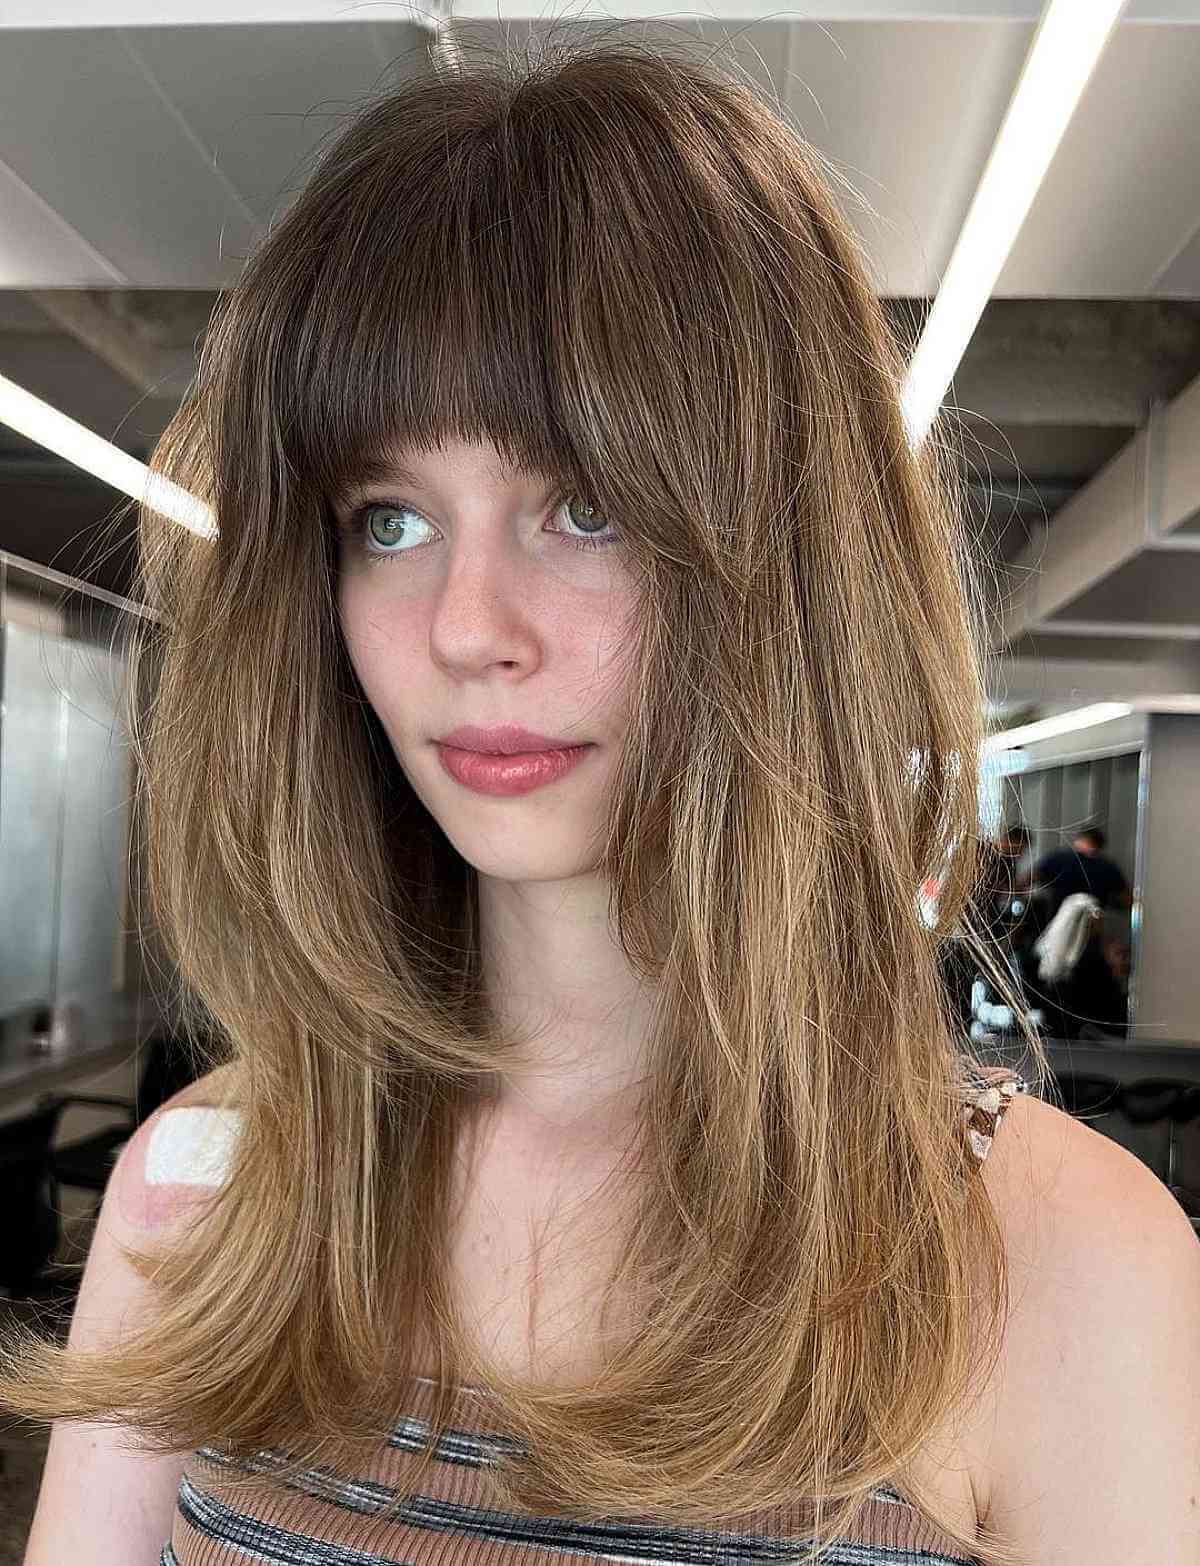 Chic Layered Cut with Textured Bangs for Long Faces